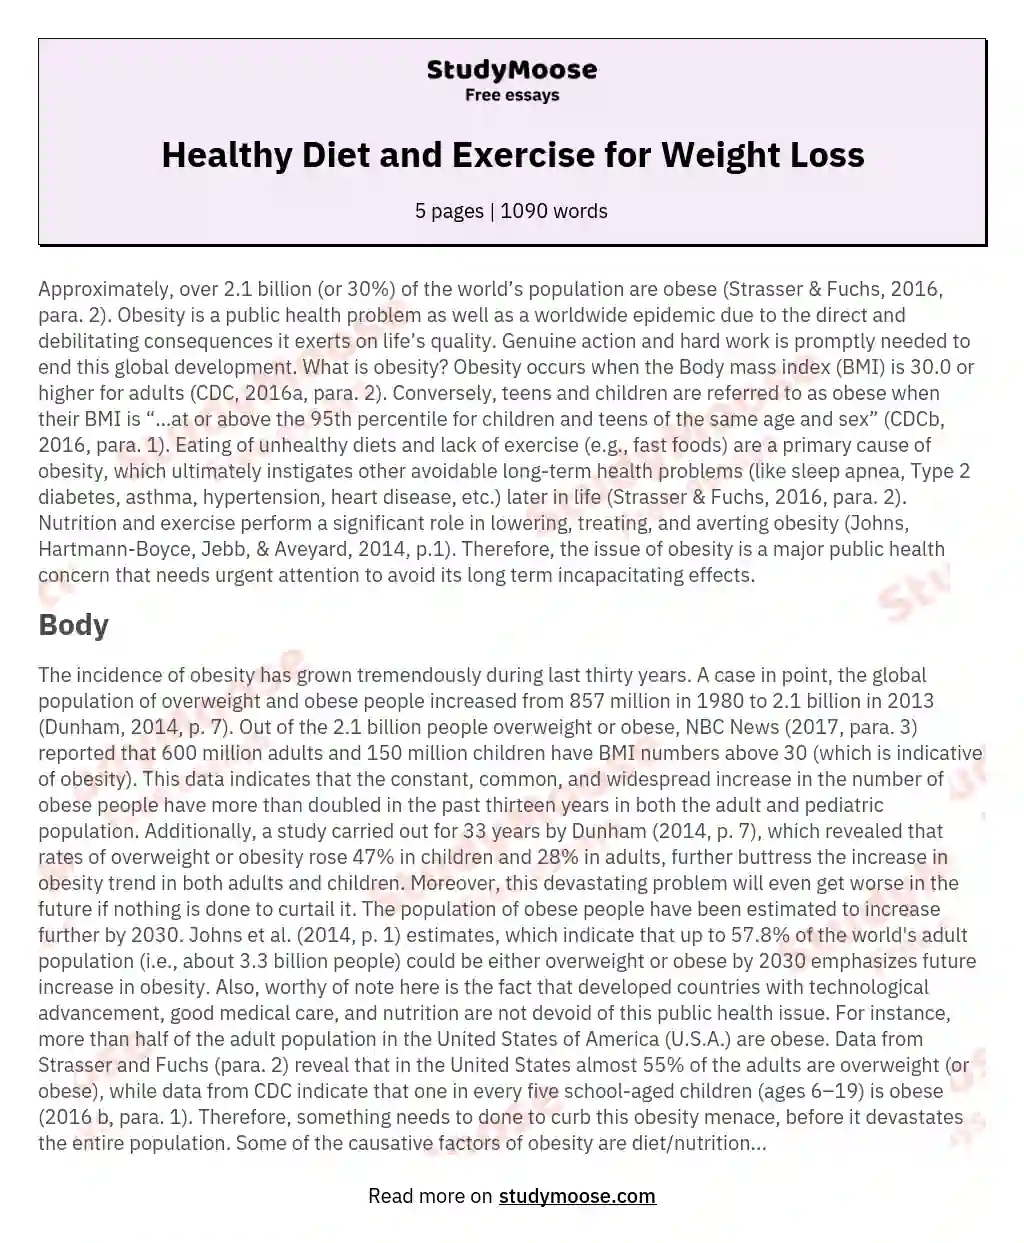 Healthy Diet and Exercise for Weight Loss